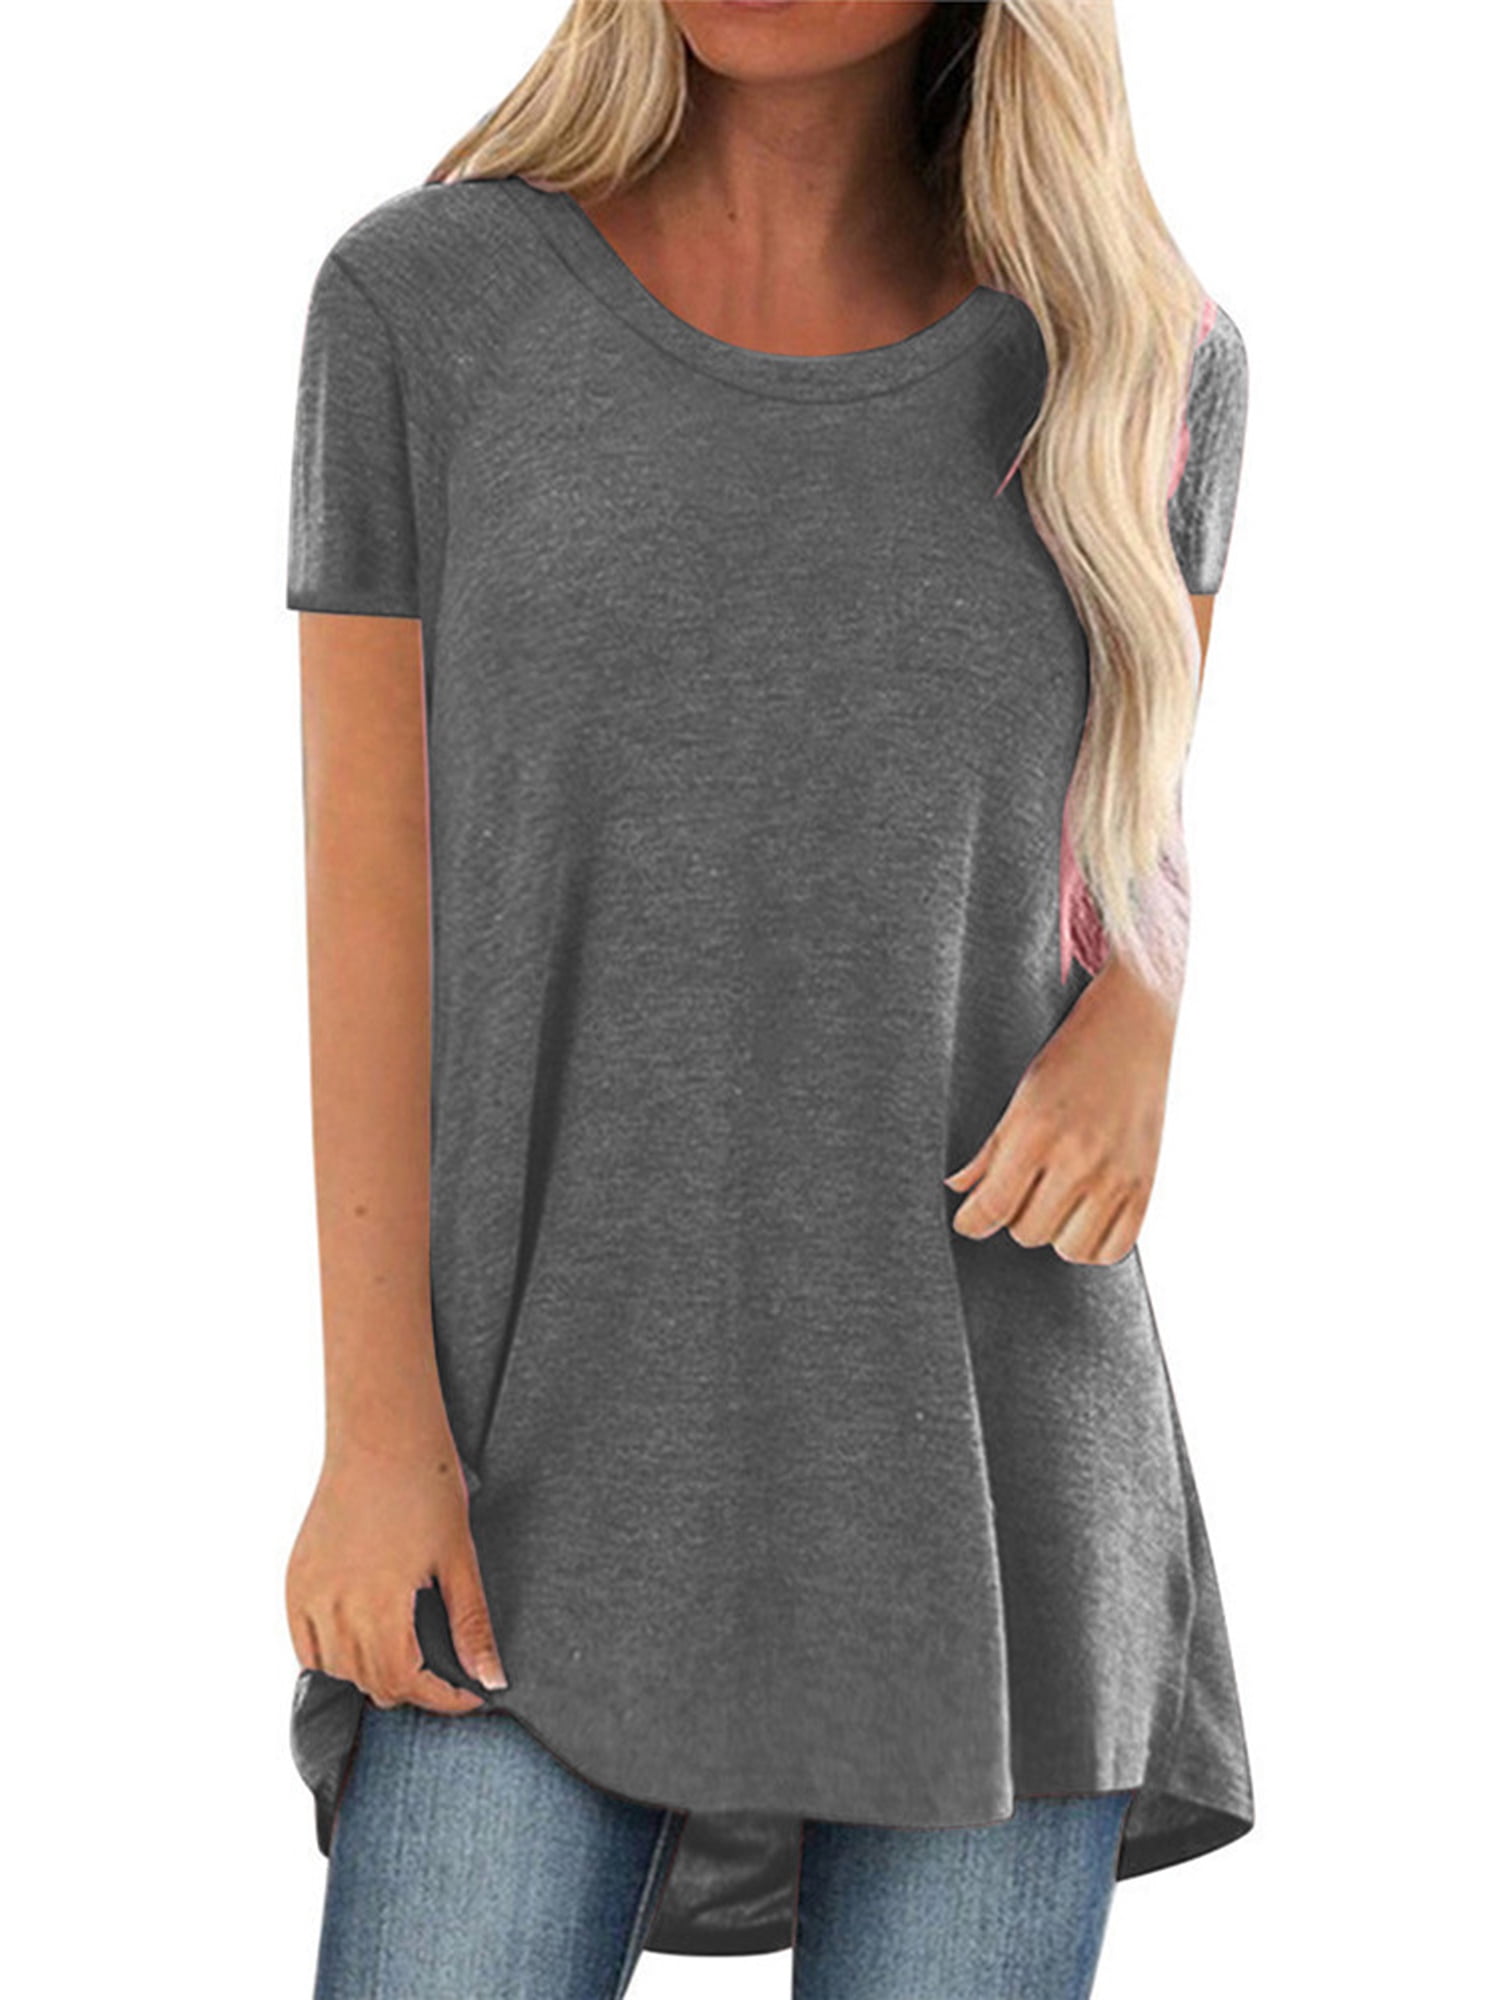 Women's Short Sleeve T Shirt Plus Size Tops Casual V Neck Tunic Loose ...